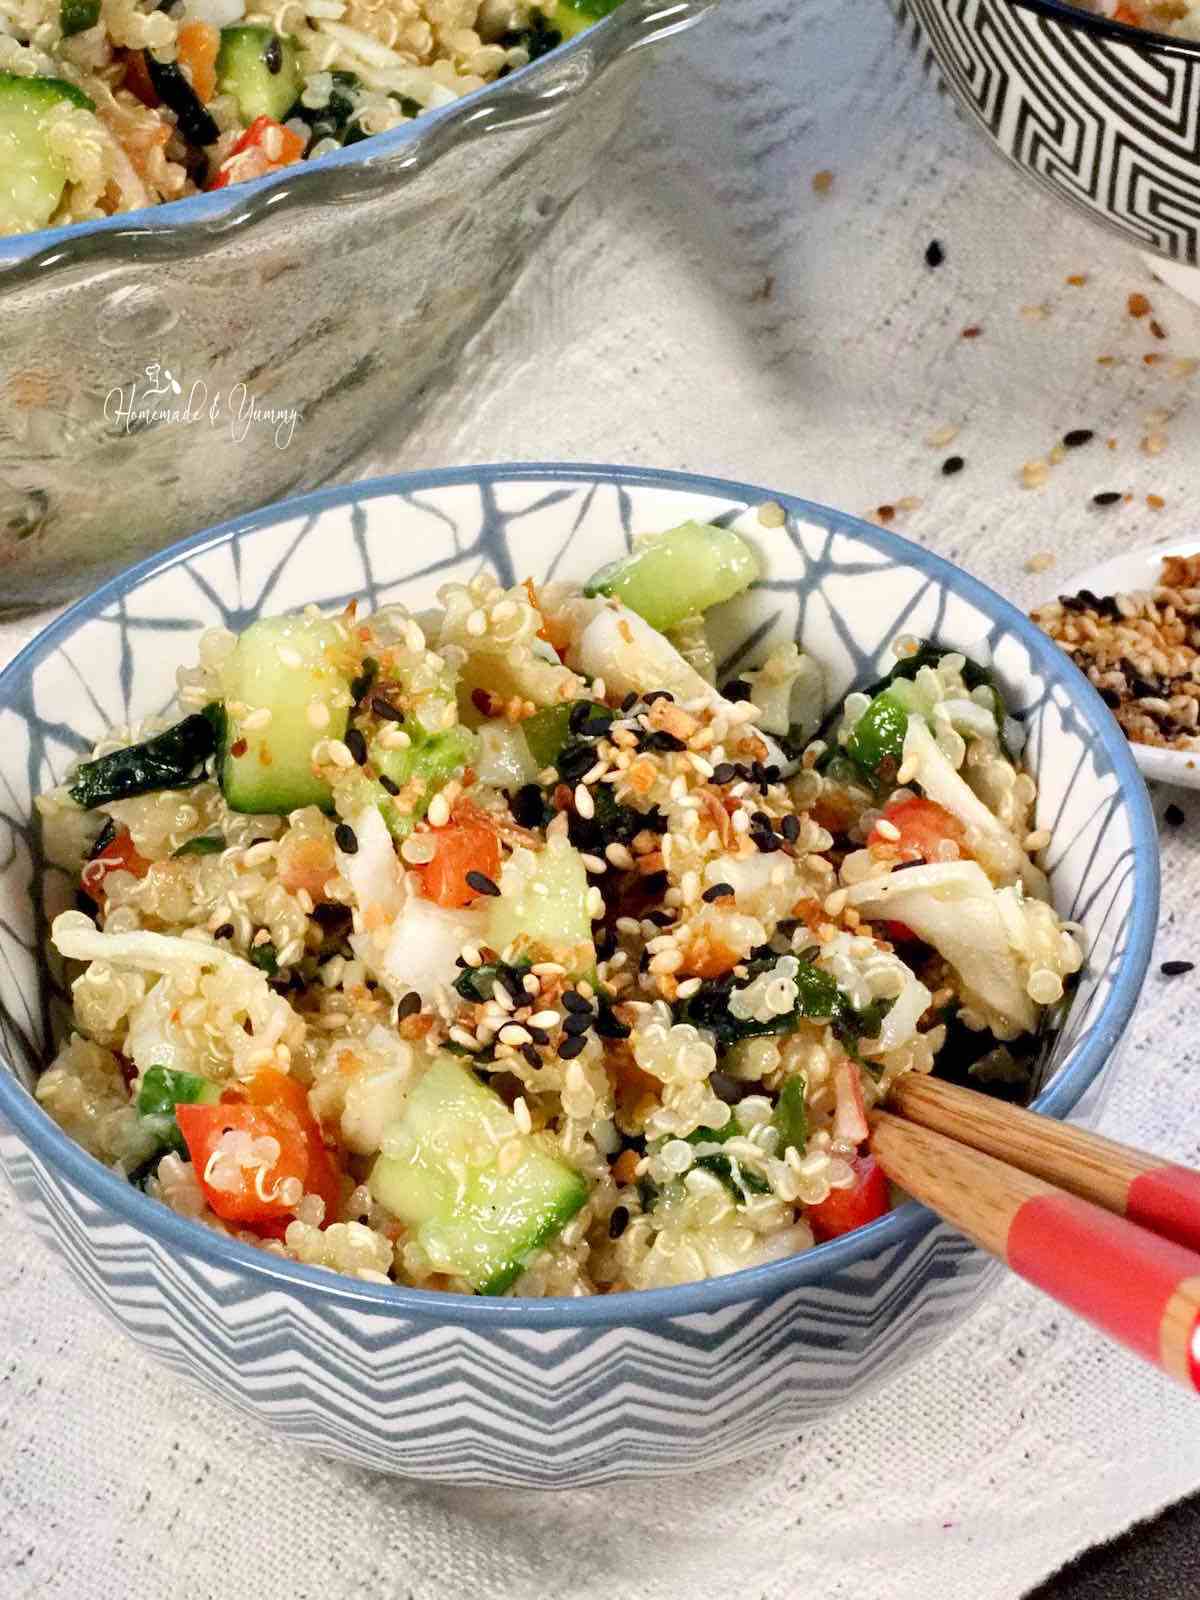 Salad with sushi ingredients.